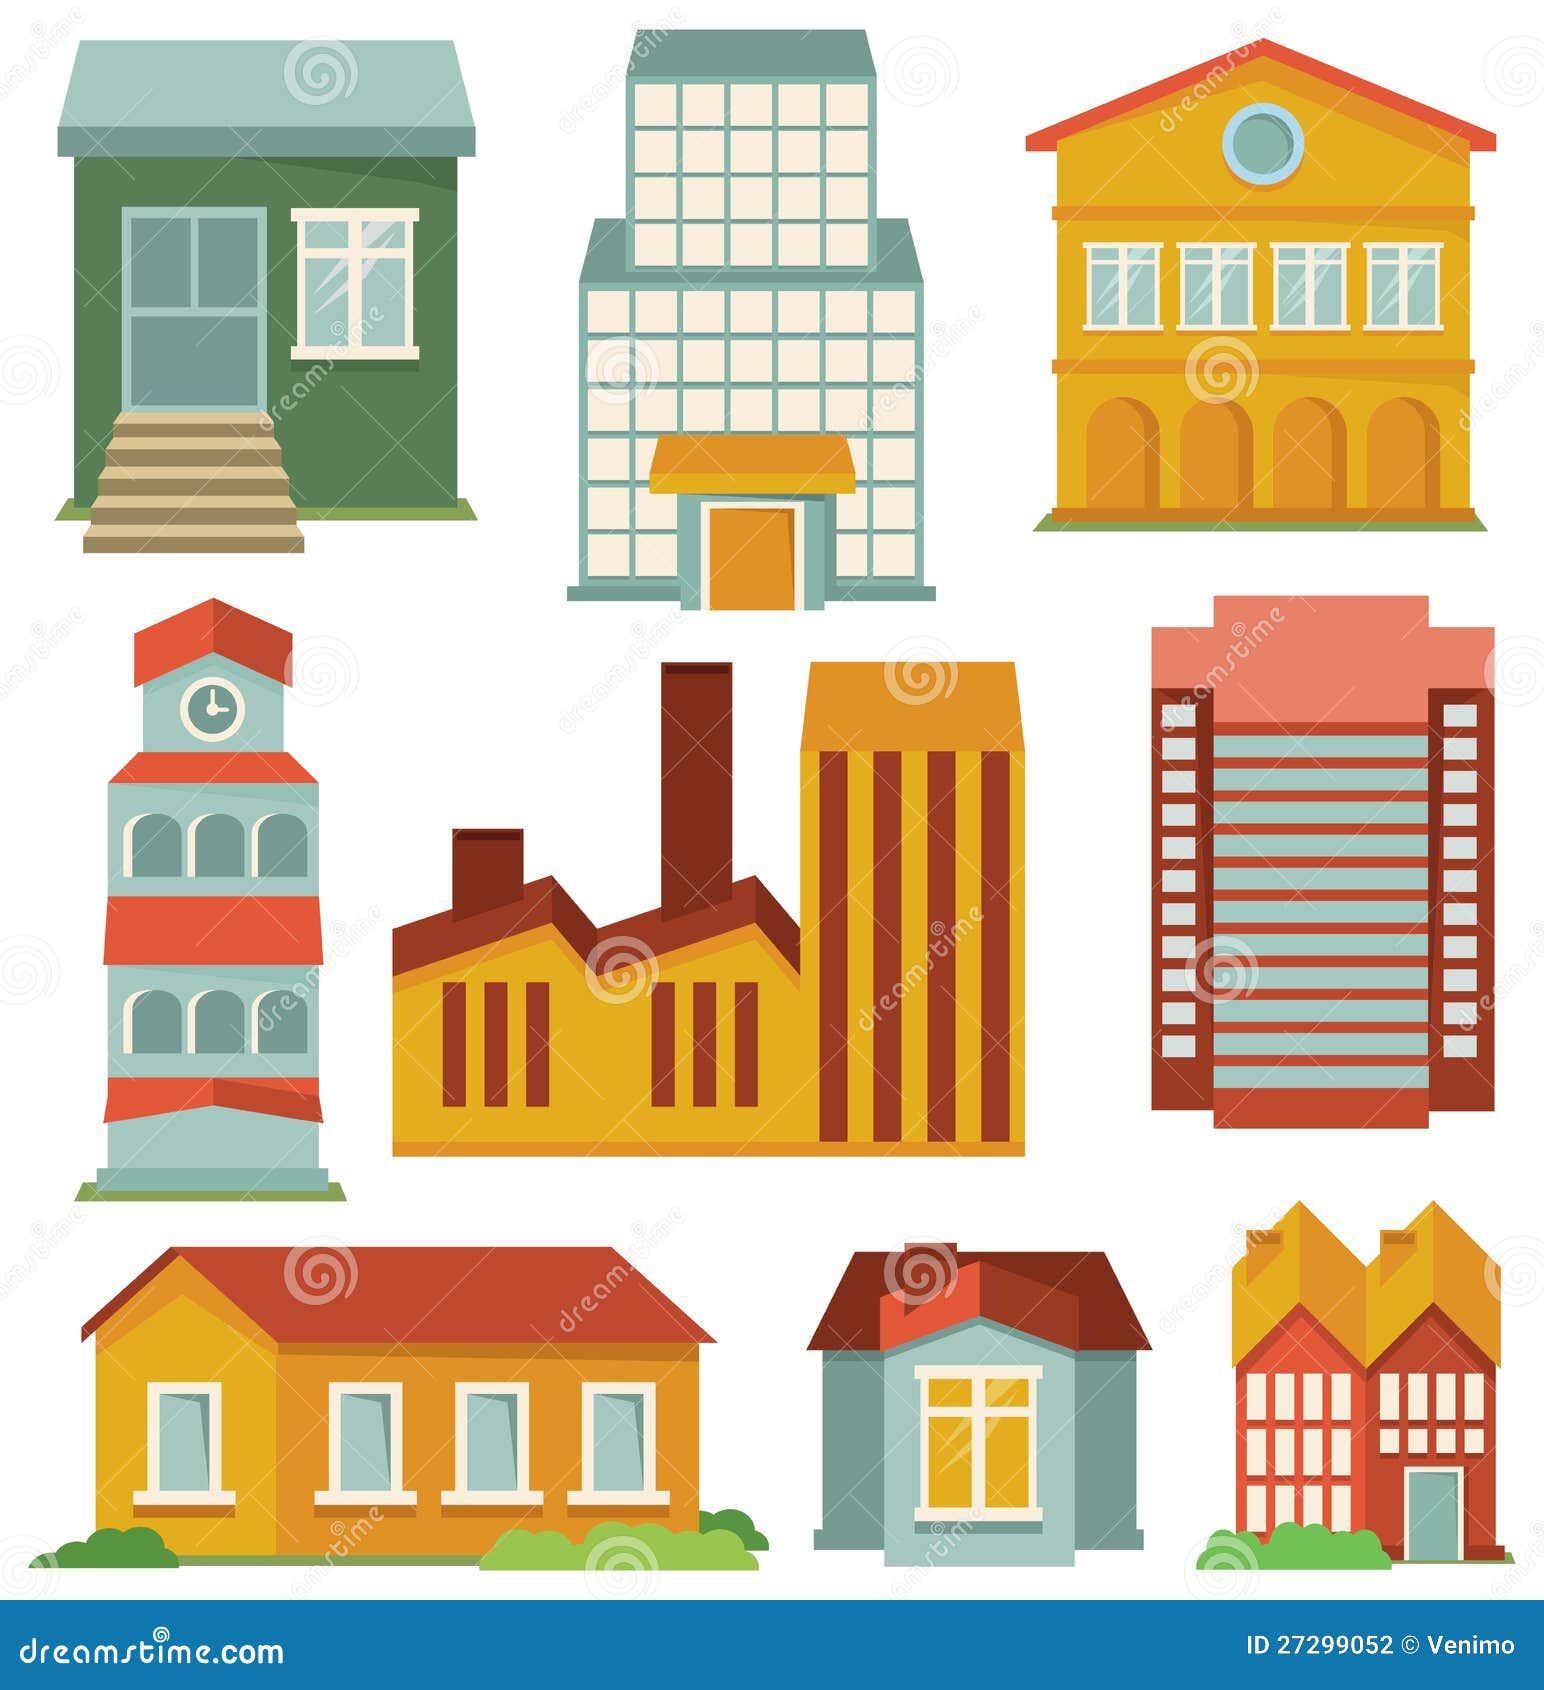 building clipart vector free download - photo #37